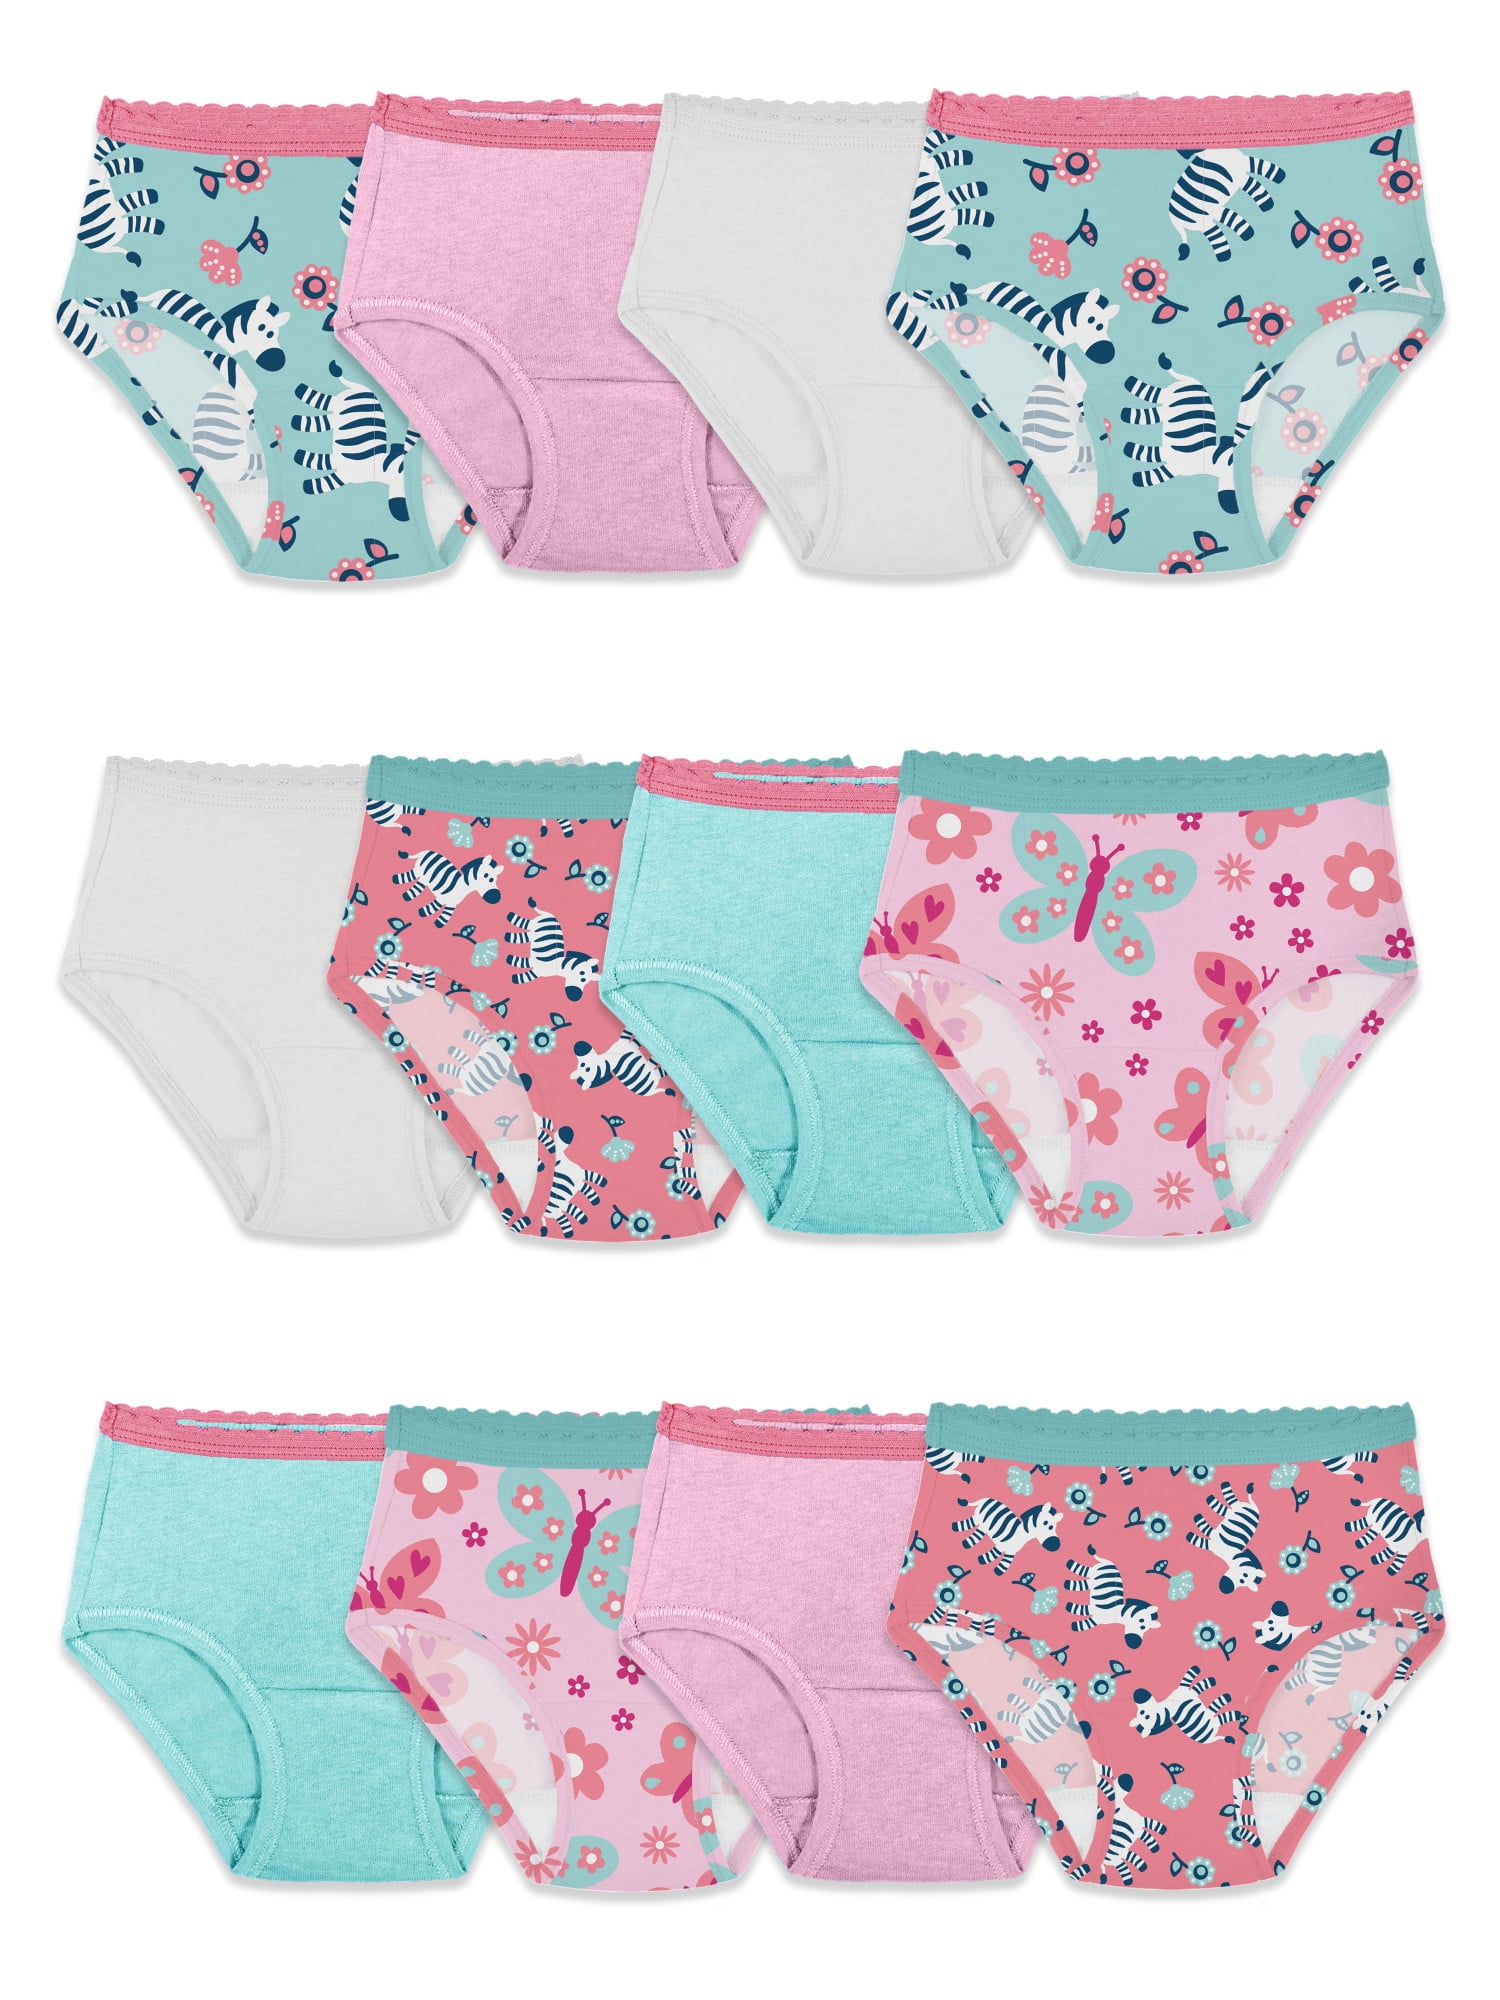 Fruit of the Loom Toddler Girl Cotton Brief Underwear, 12 Pack 